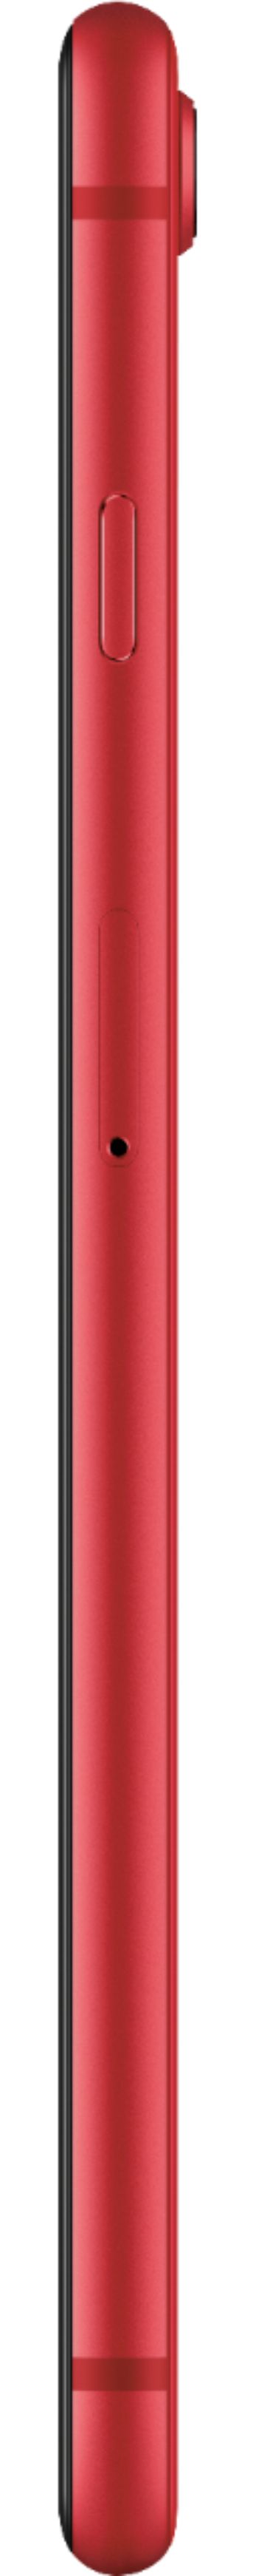 Best Buy: Apple iPhone 8 Plus 256GB (PRODUCT)RED™ Special Edition 